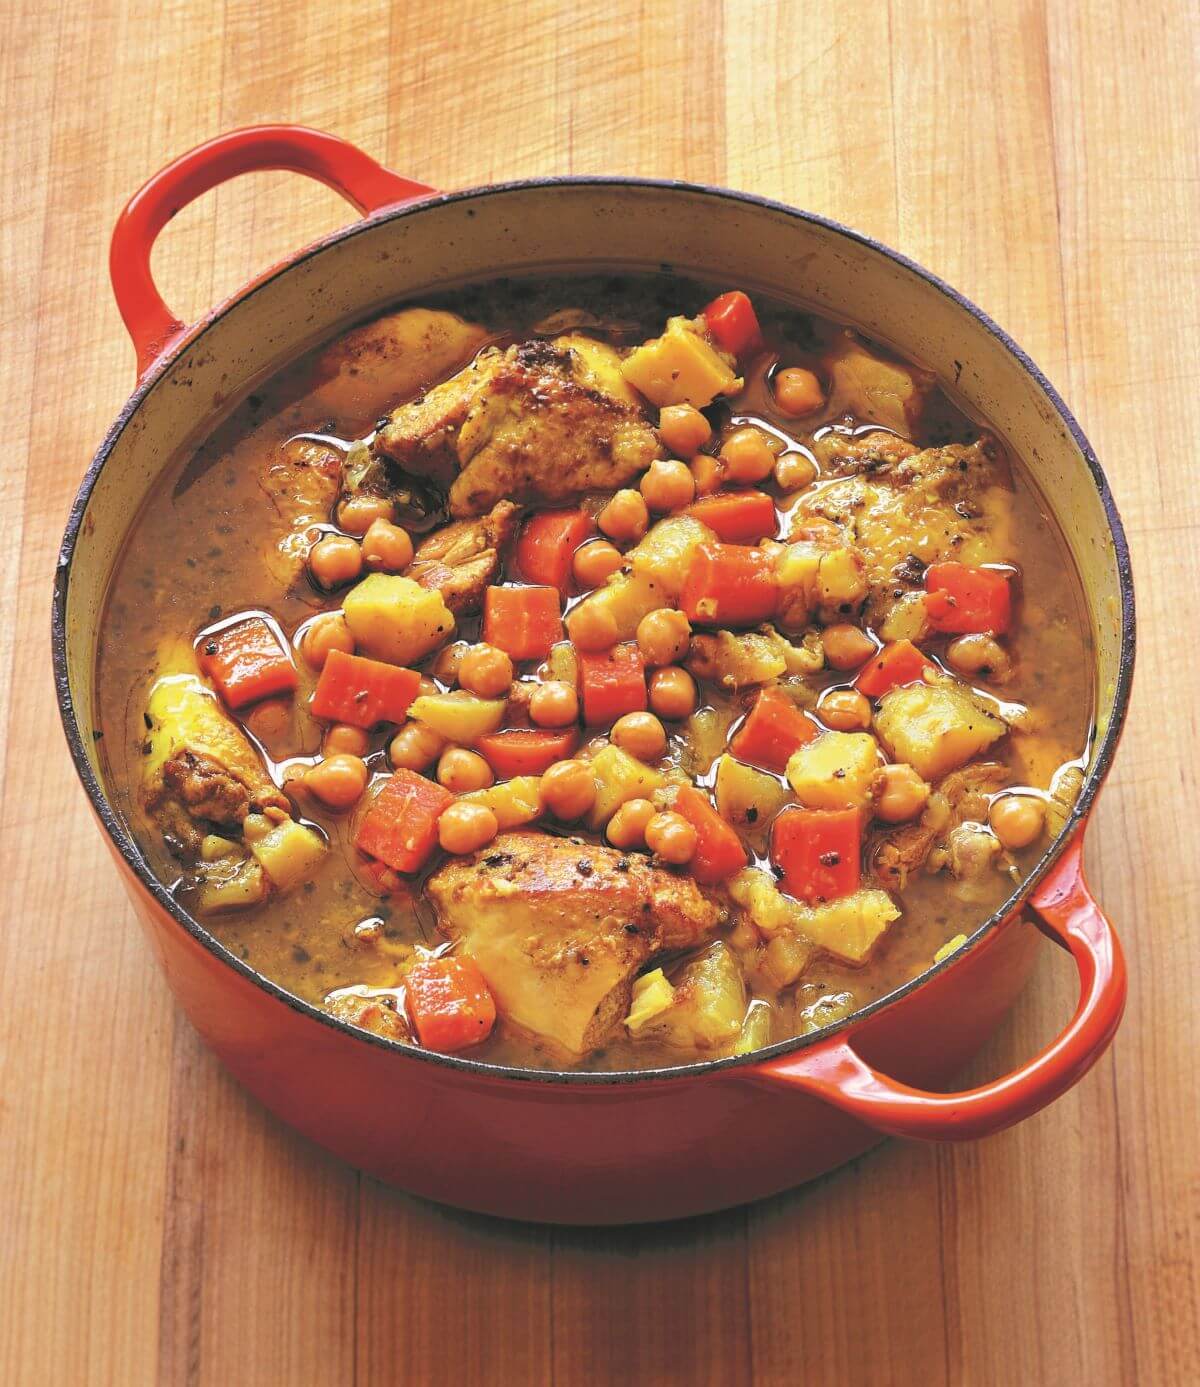 Moroccan Chicken and Vegetable Casserole